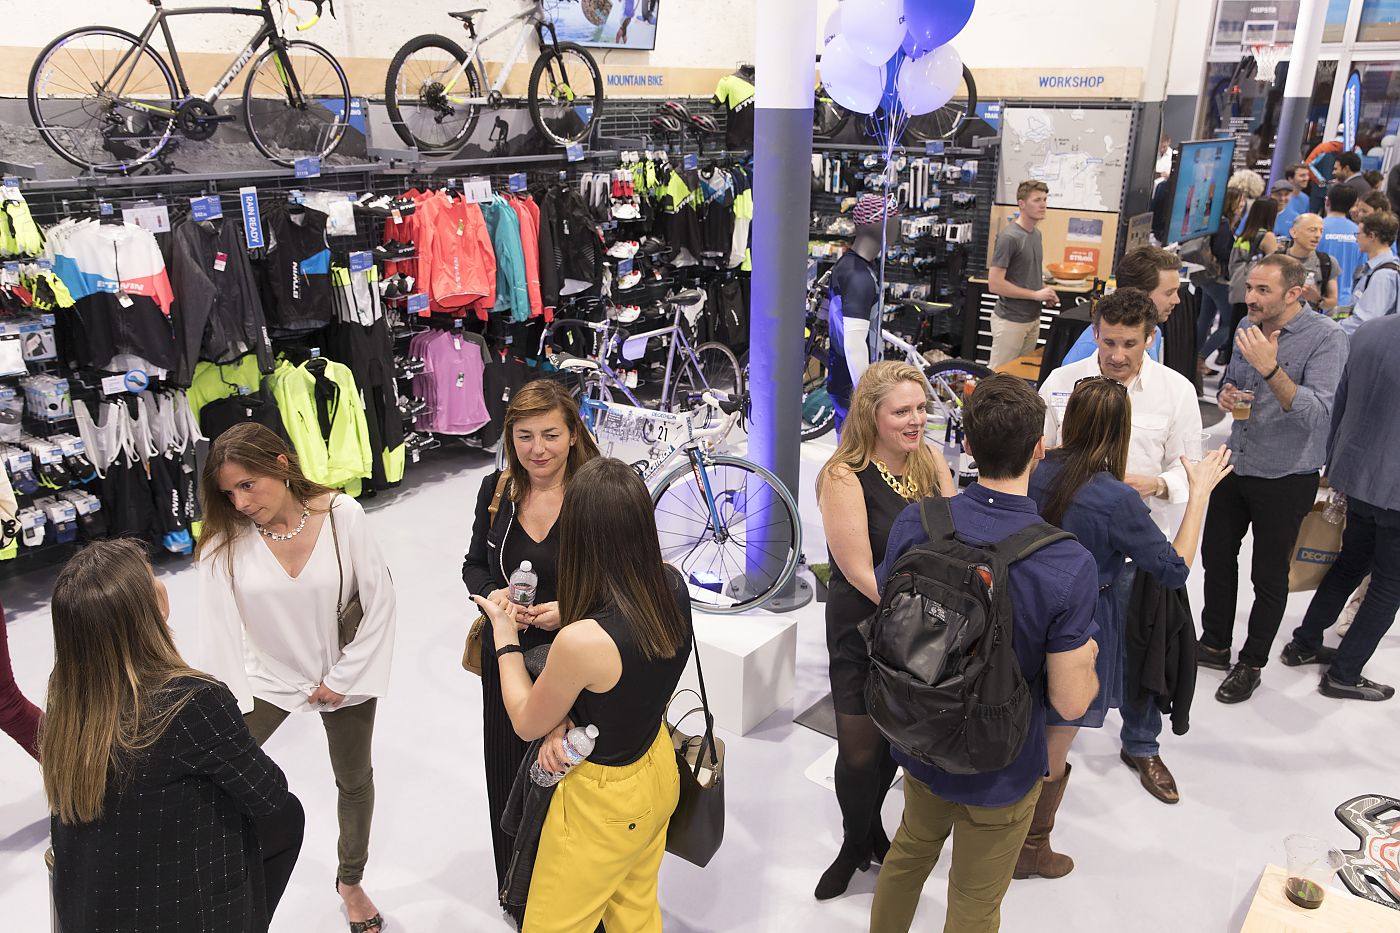 Decathlon will open first Australia store in October, plans 100 stores